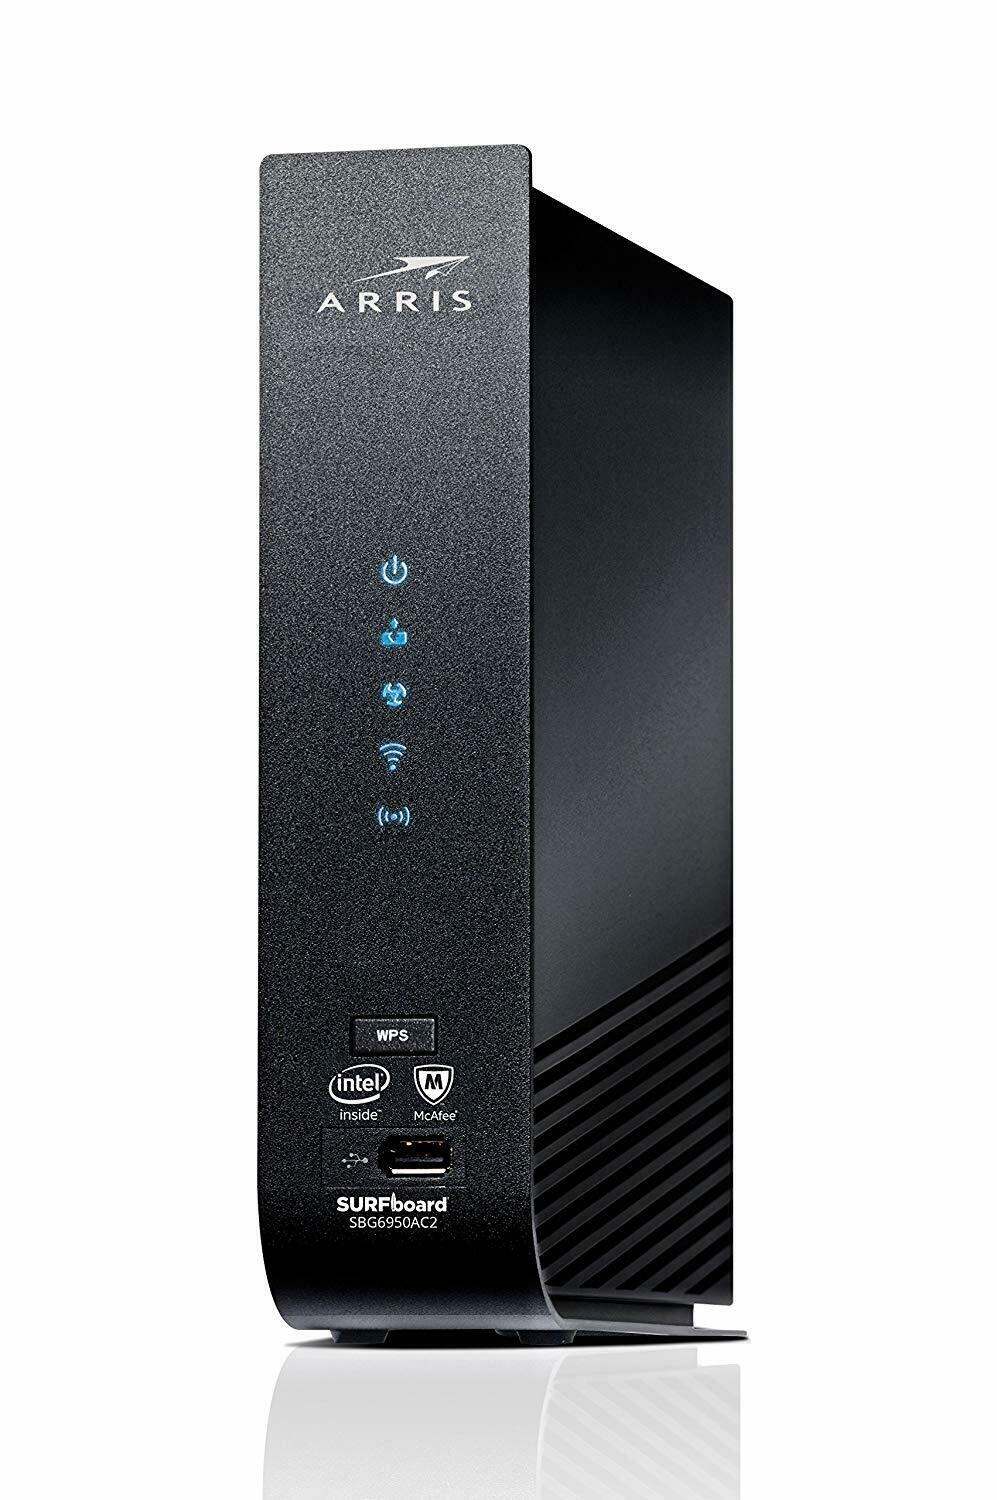 Arris Sbg6950ac2 3-in-1 Cable Modem / Wifi Router With Mcafee Manufacturer Renew